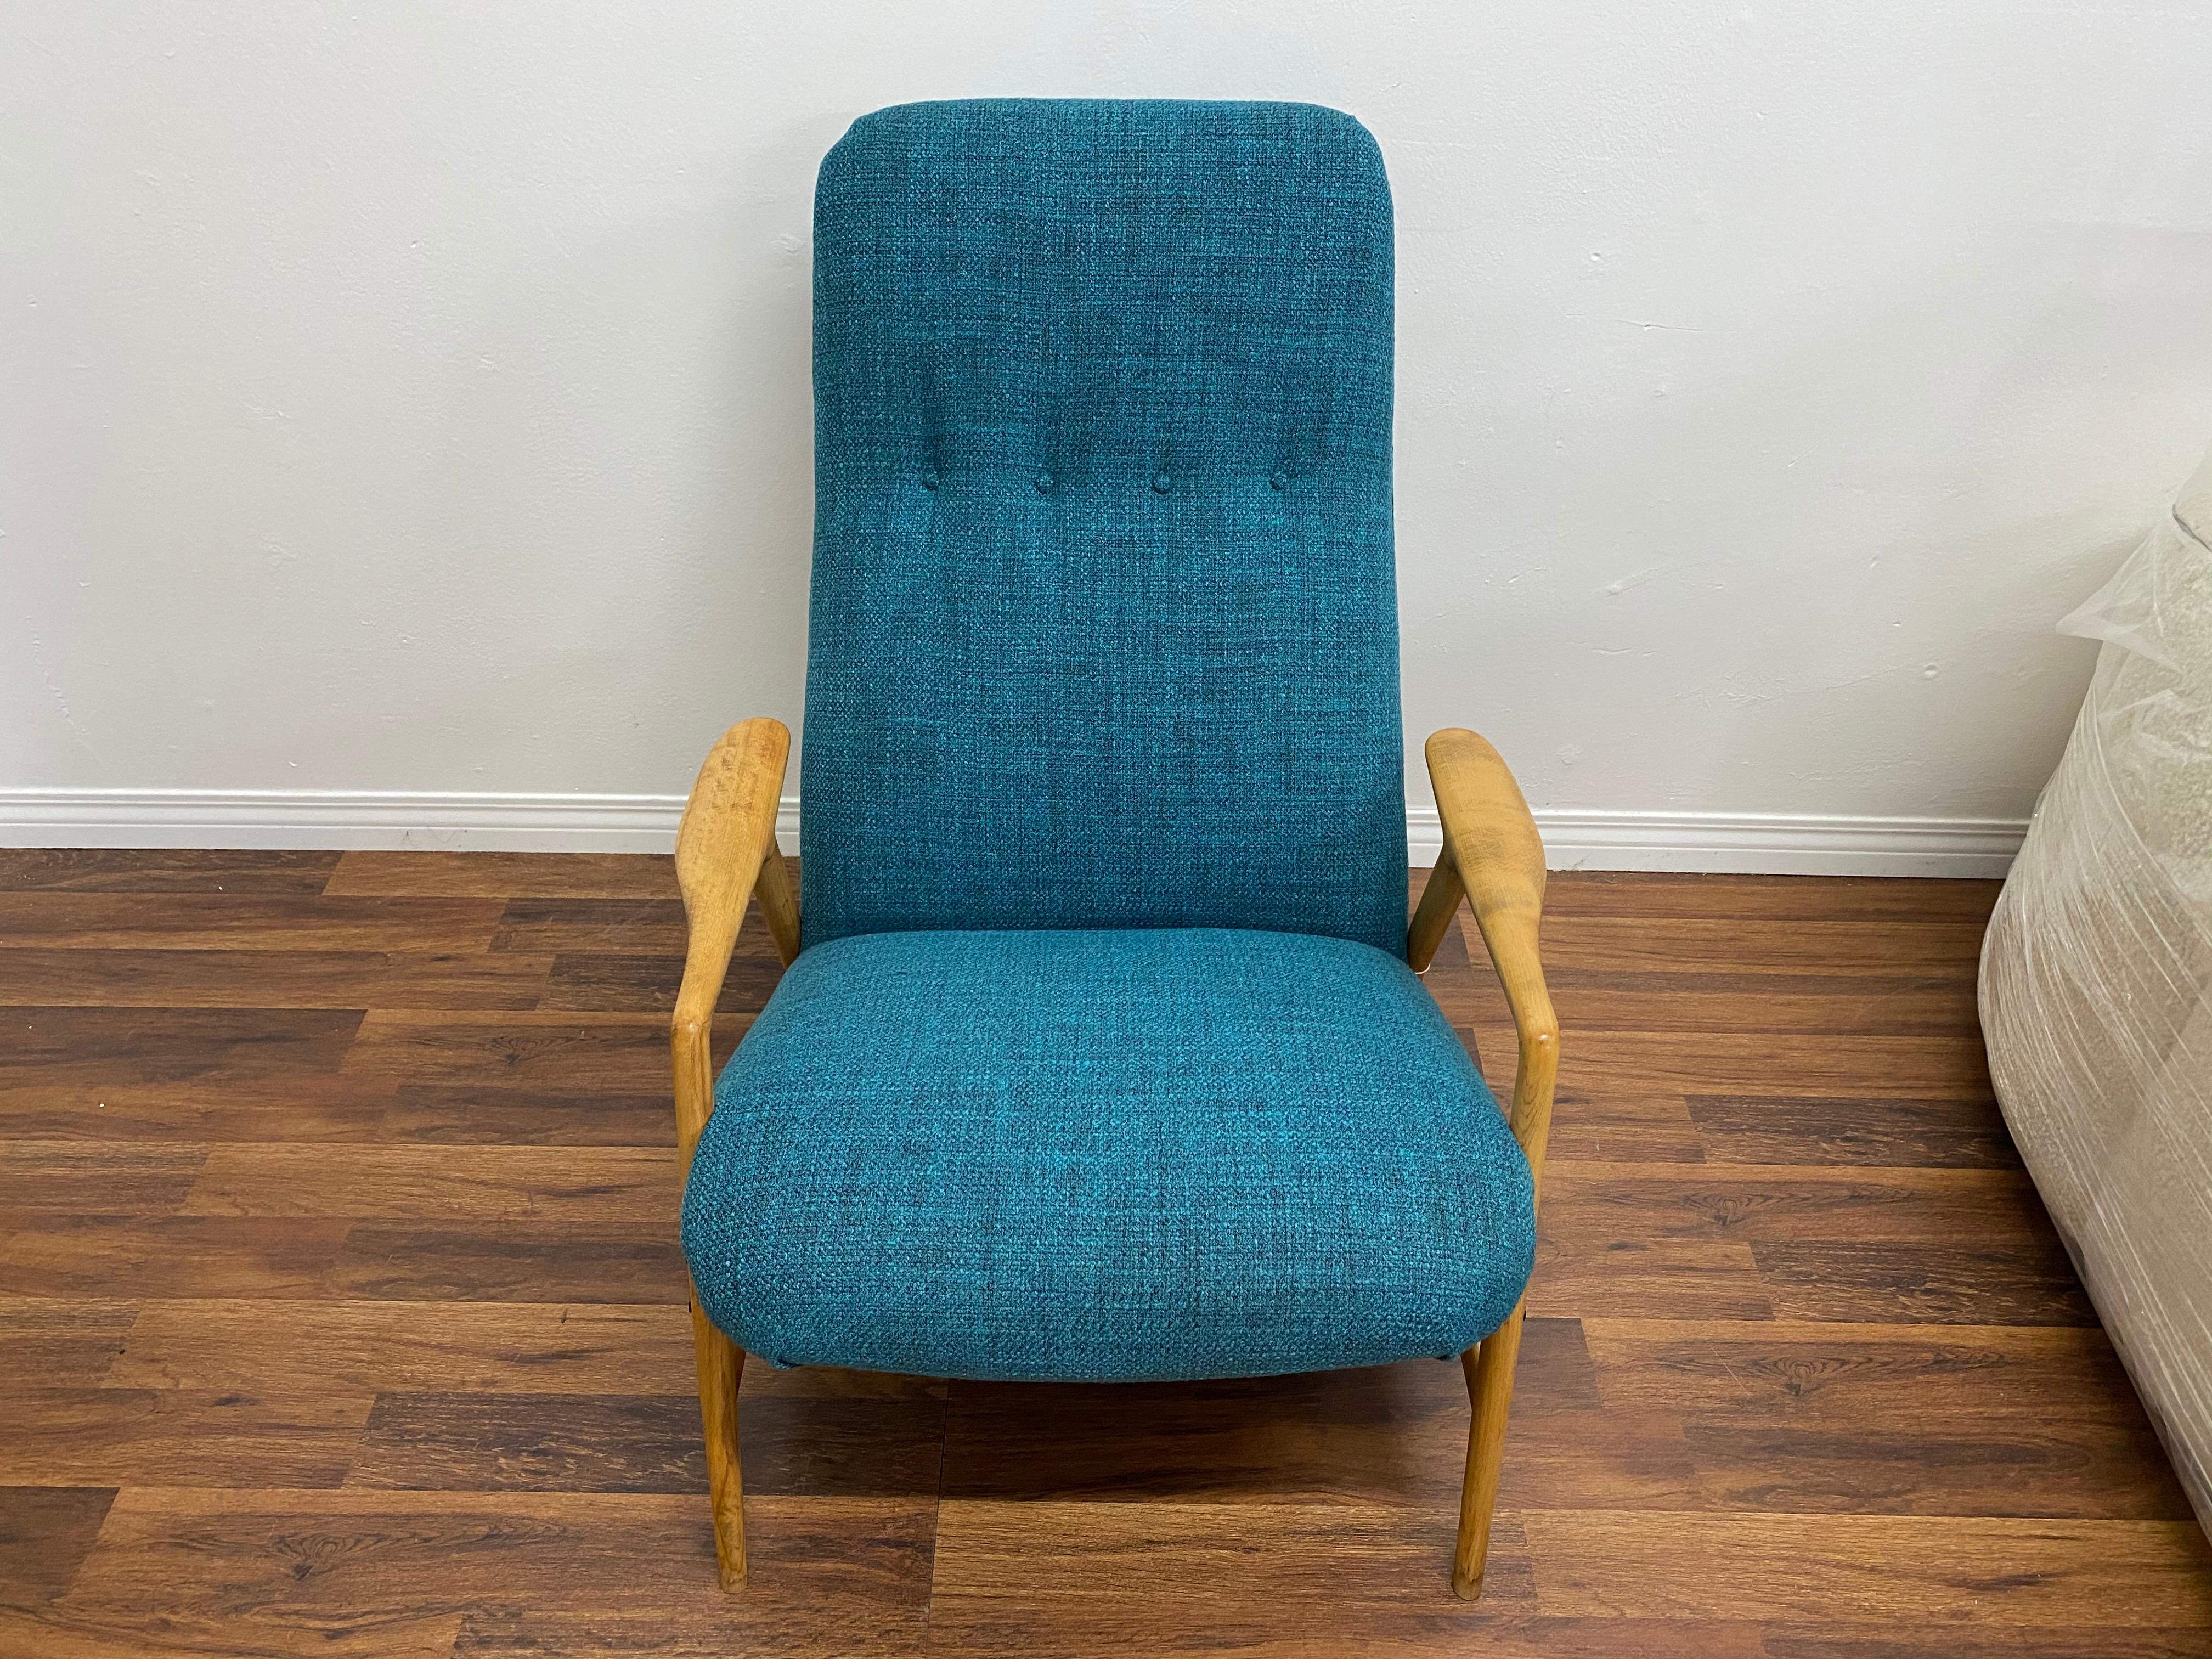 Lounge chair with ottoman by Alf Svensson for DUX of Sweden, circa 1950s. Newly upholstered in a new tweed fabric. The chair features a high back and Dual angle adjustment setting. Solid sculptural birch frame with brass accents. The birch frames